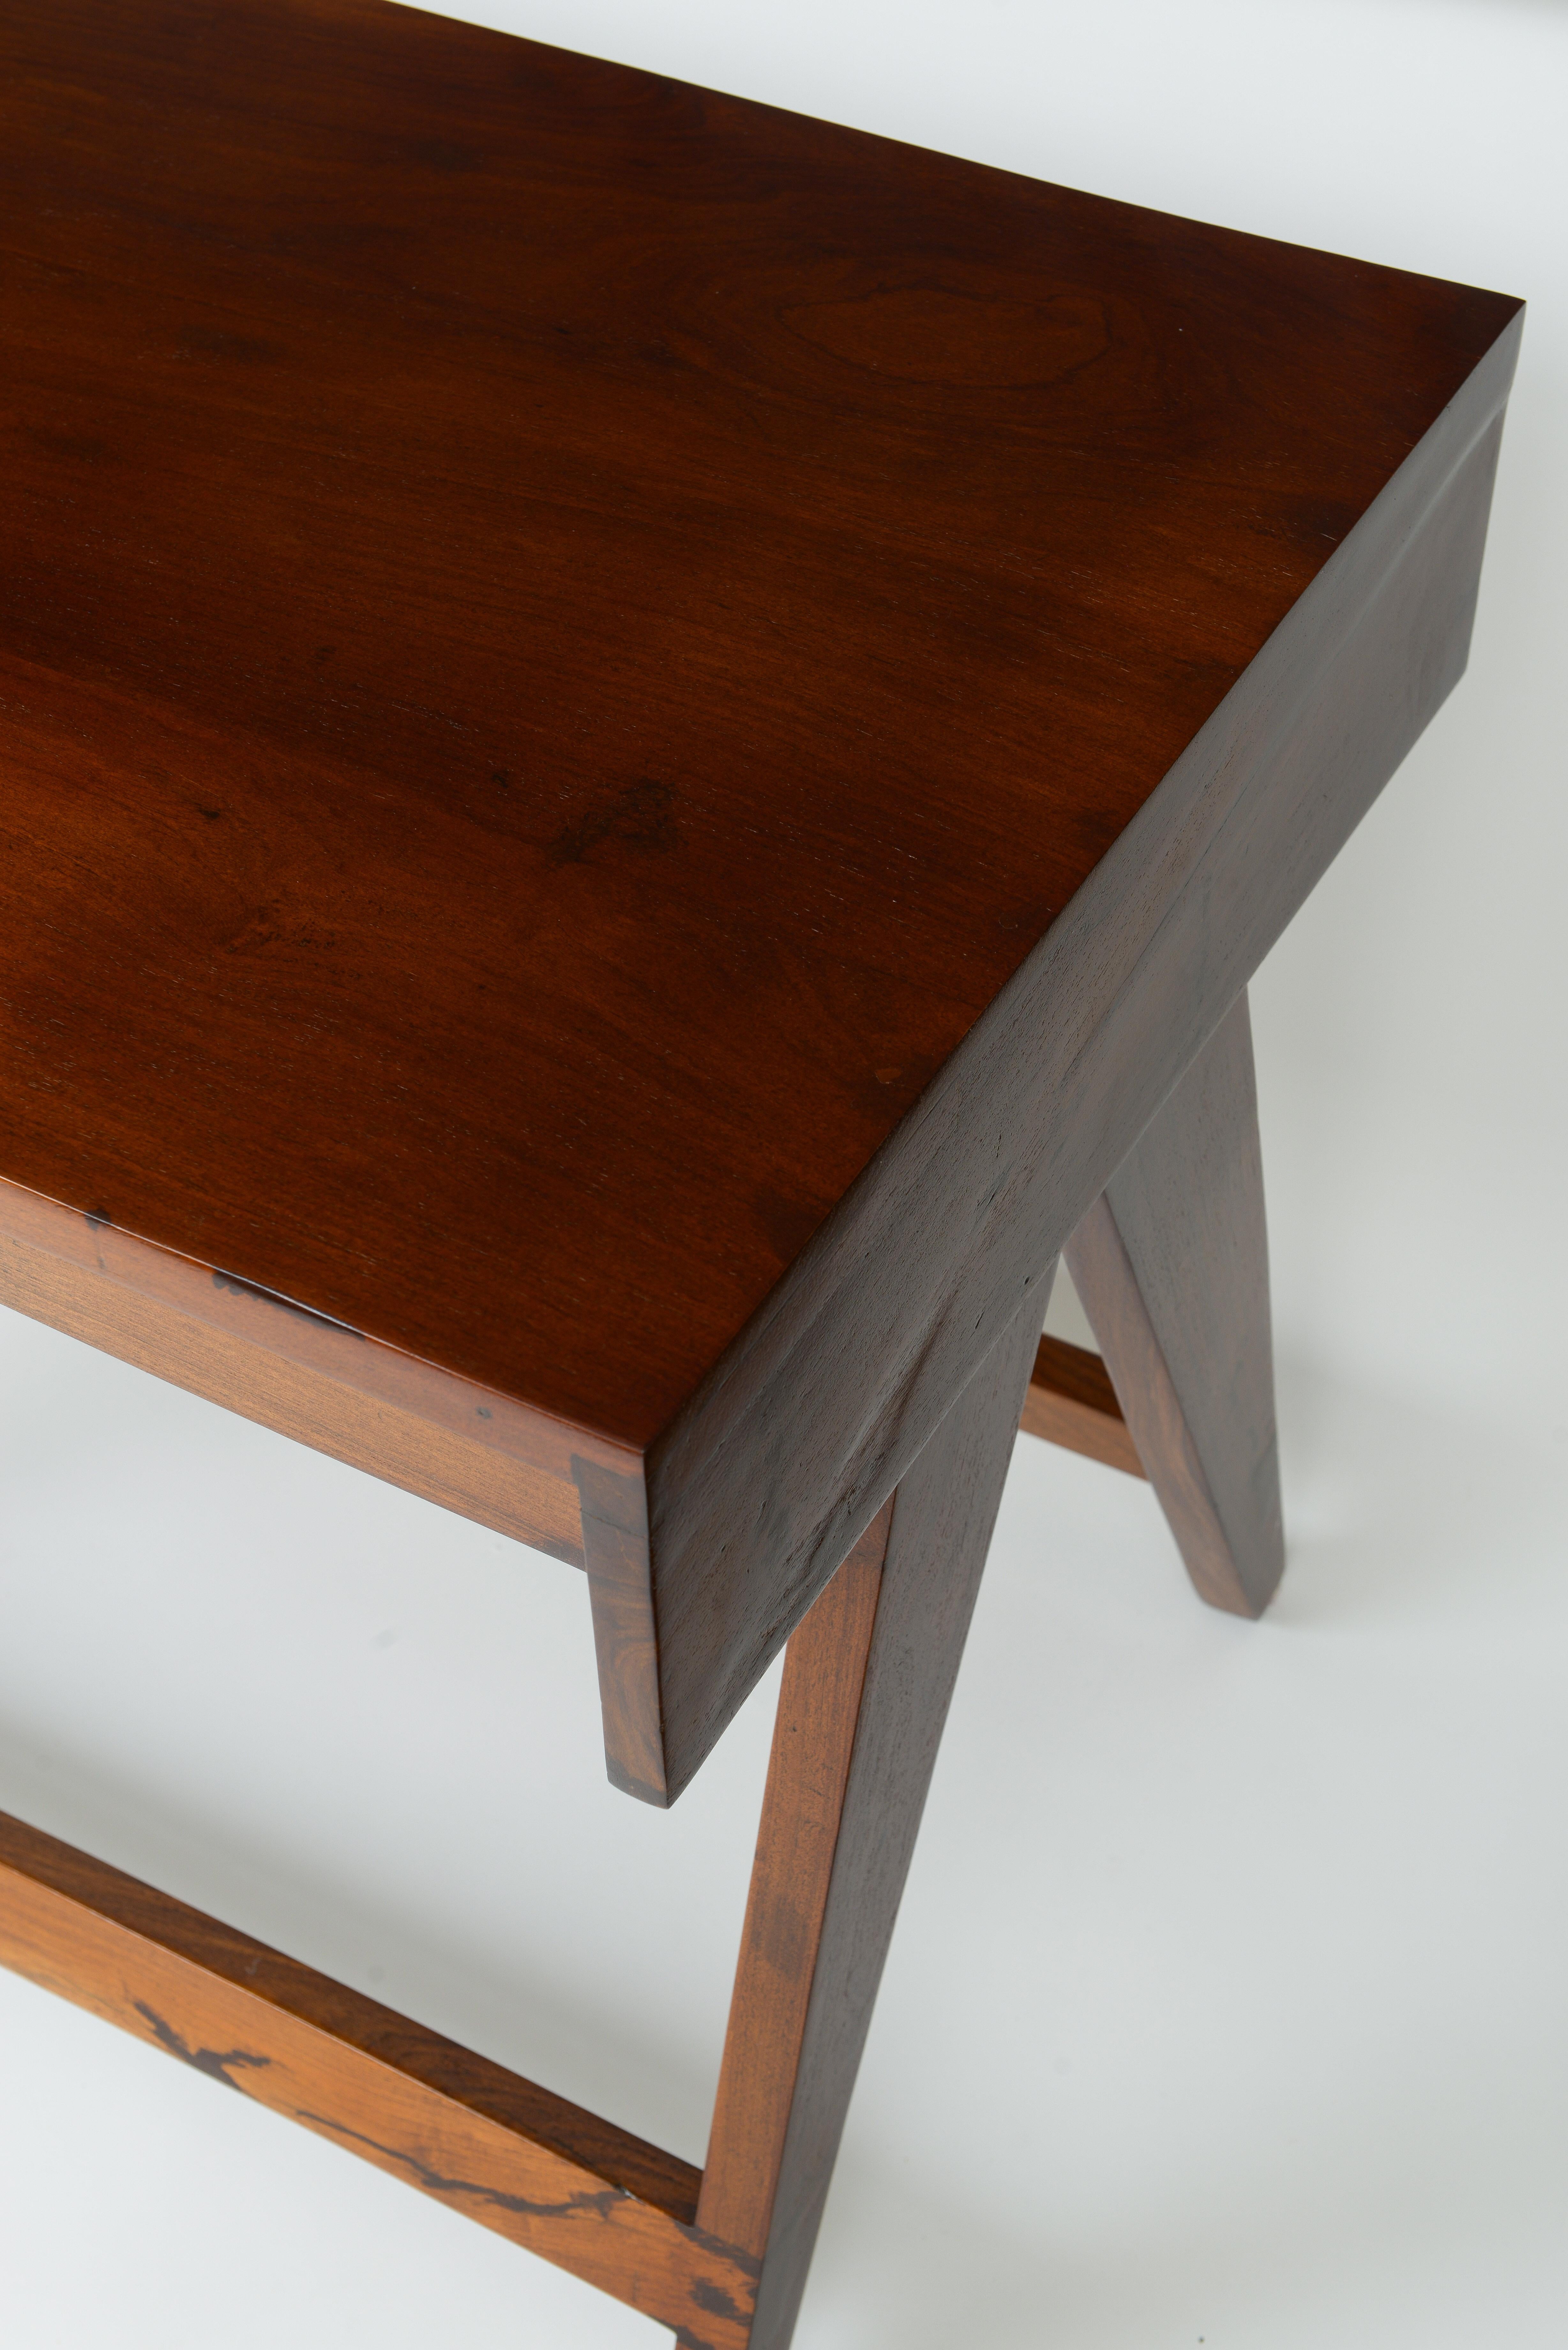 Indian Pierre Jeanneret Desk and Stool from the city of Chandigarh, India 1950 - 1959 For Sale